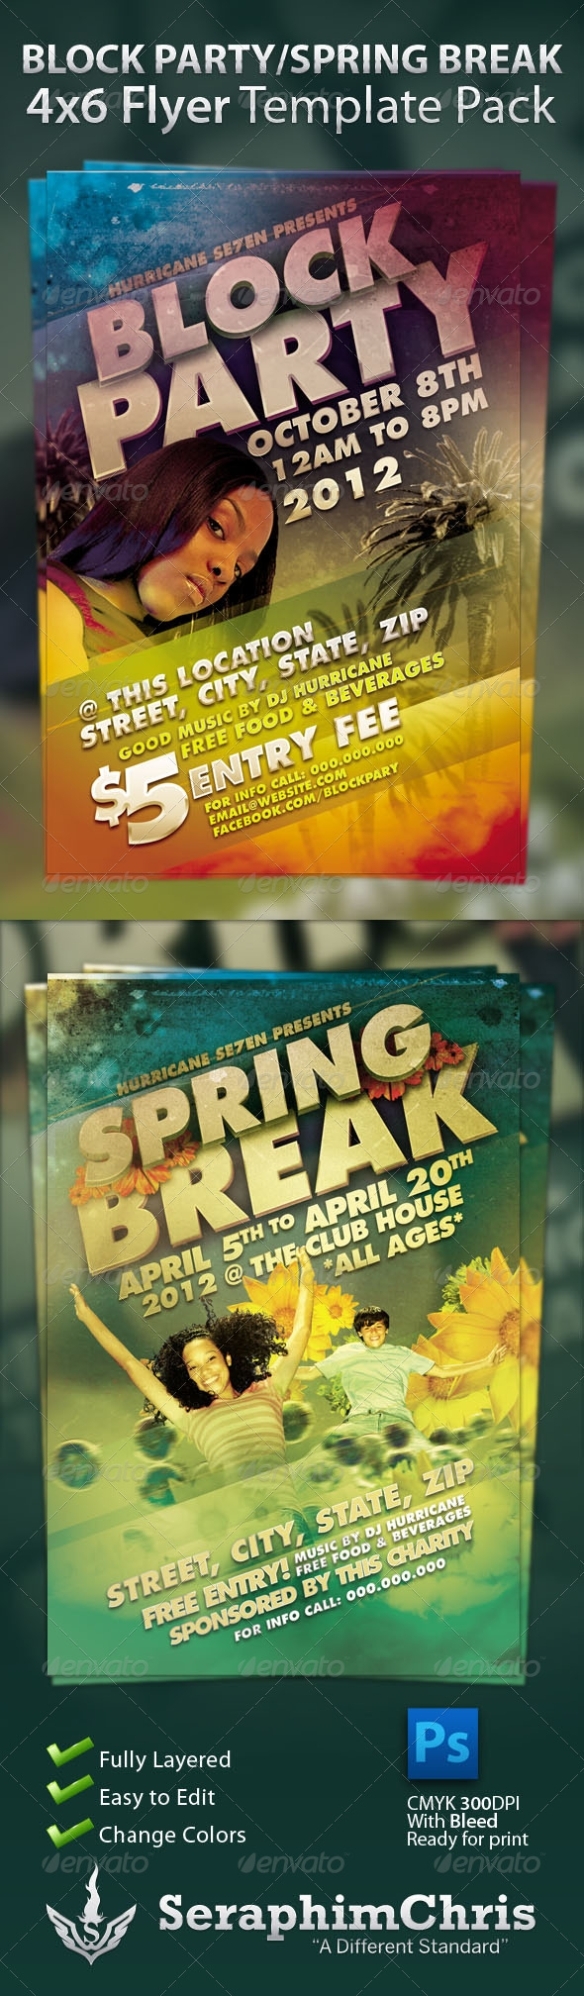 Block Party And Spring Break Flyer Template Pack By Seraphimchris within Block Party Flyer Template